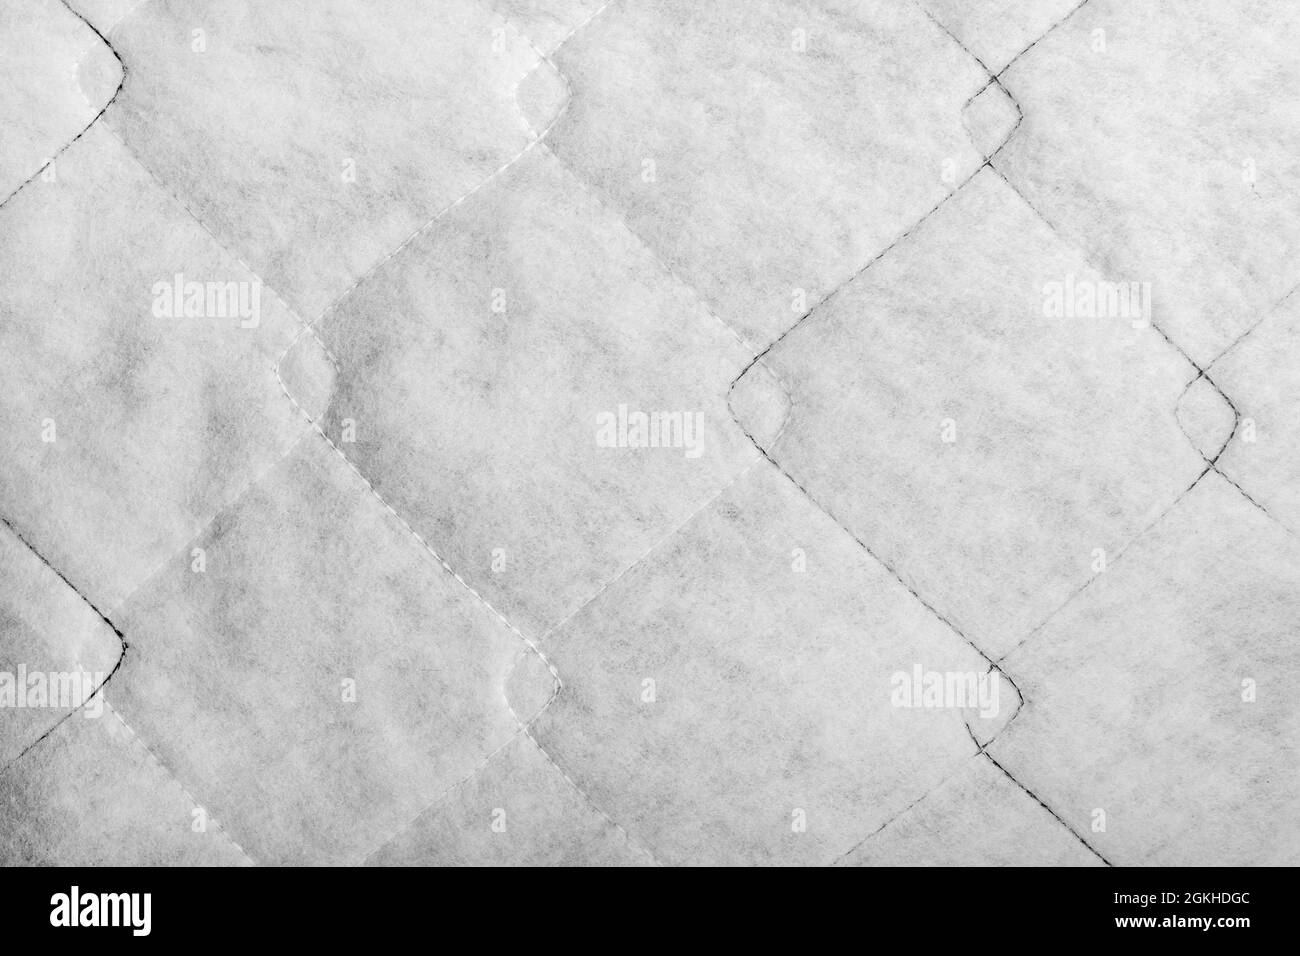 Texture backdrop photo of white colored sintepon fibers material with stitching pattern. Stock Photo